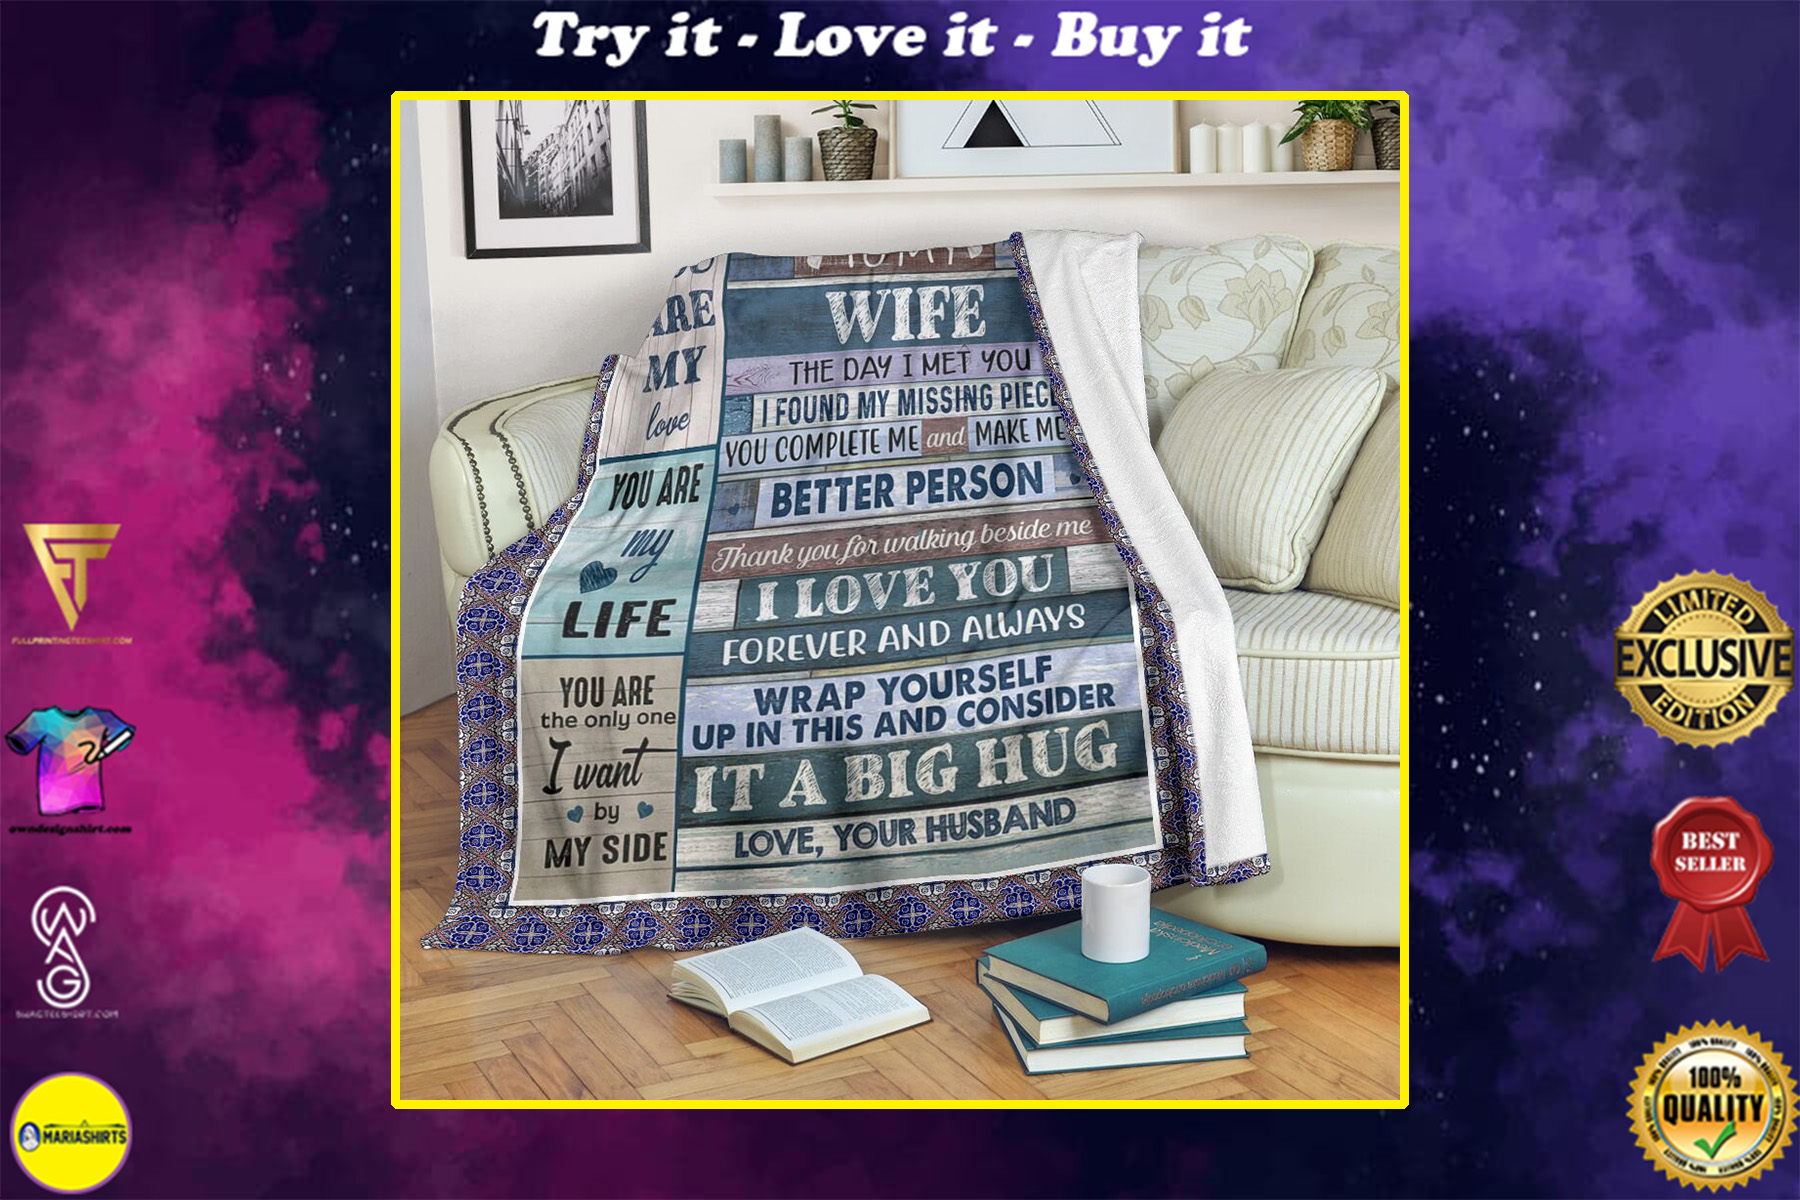 to my wife you are the only one i want by my side full printing blanket